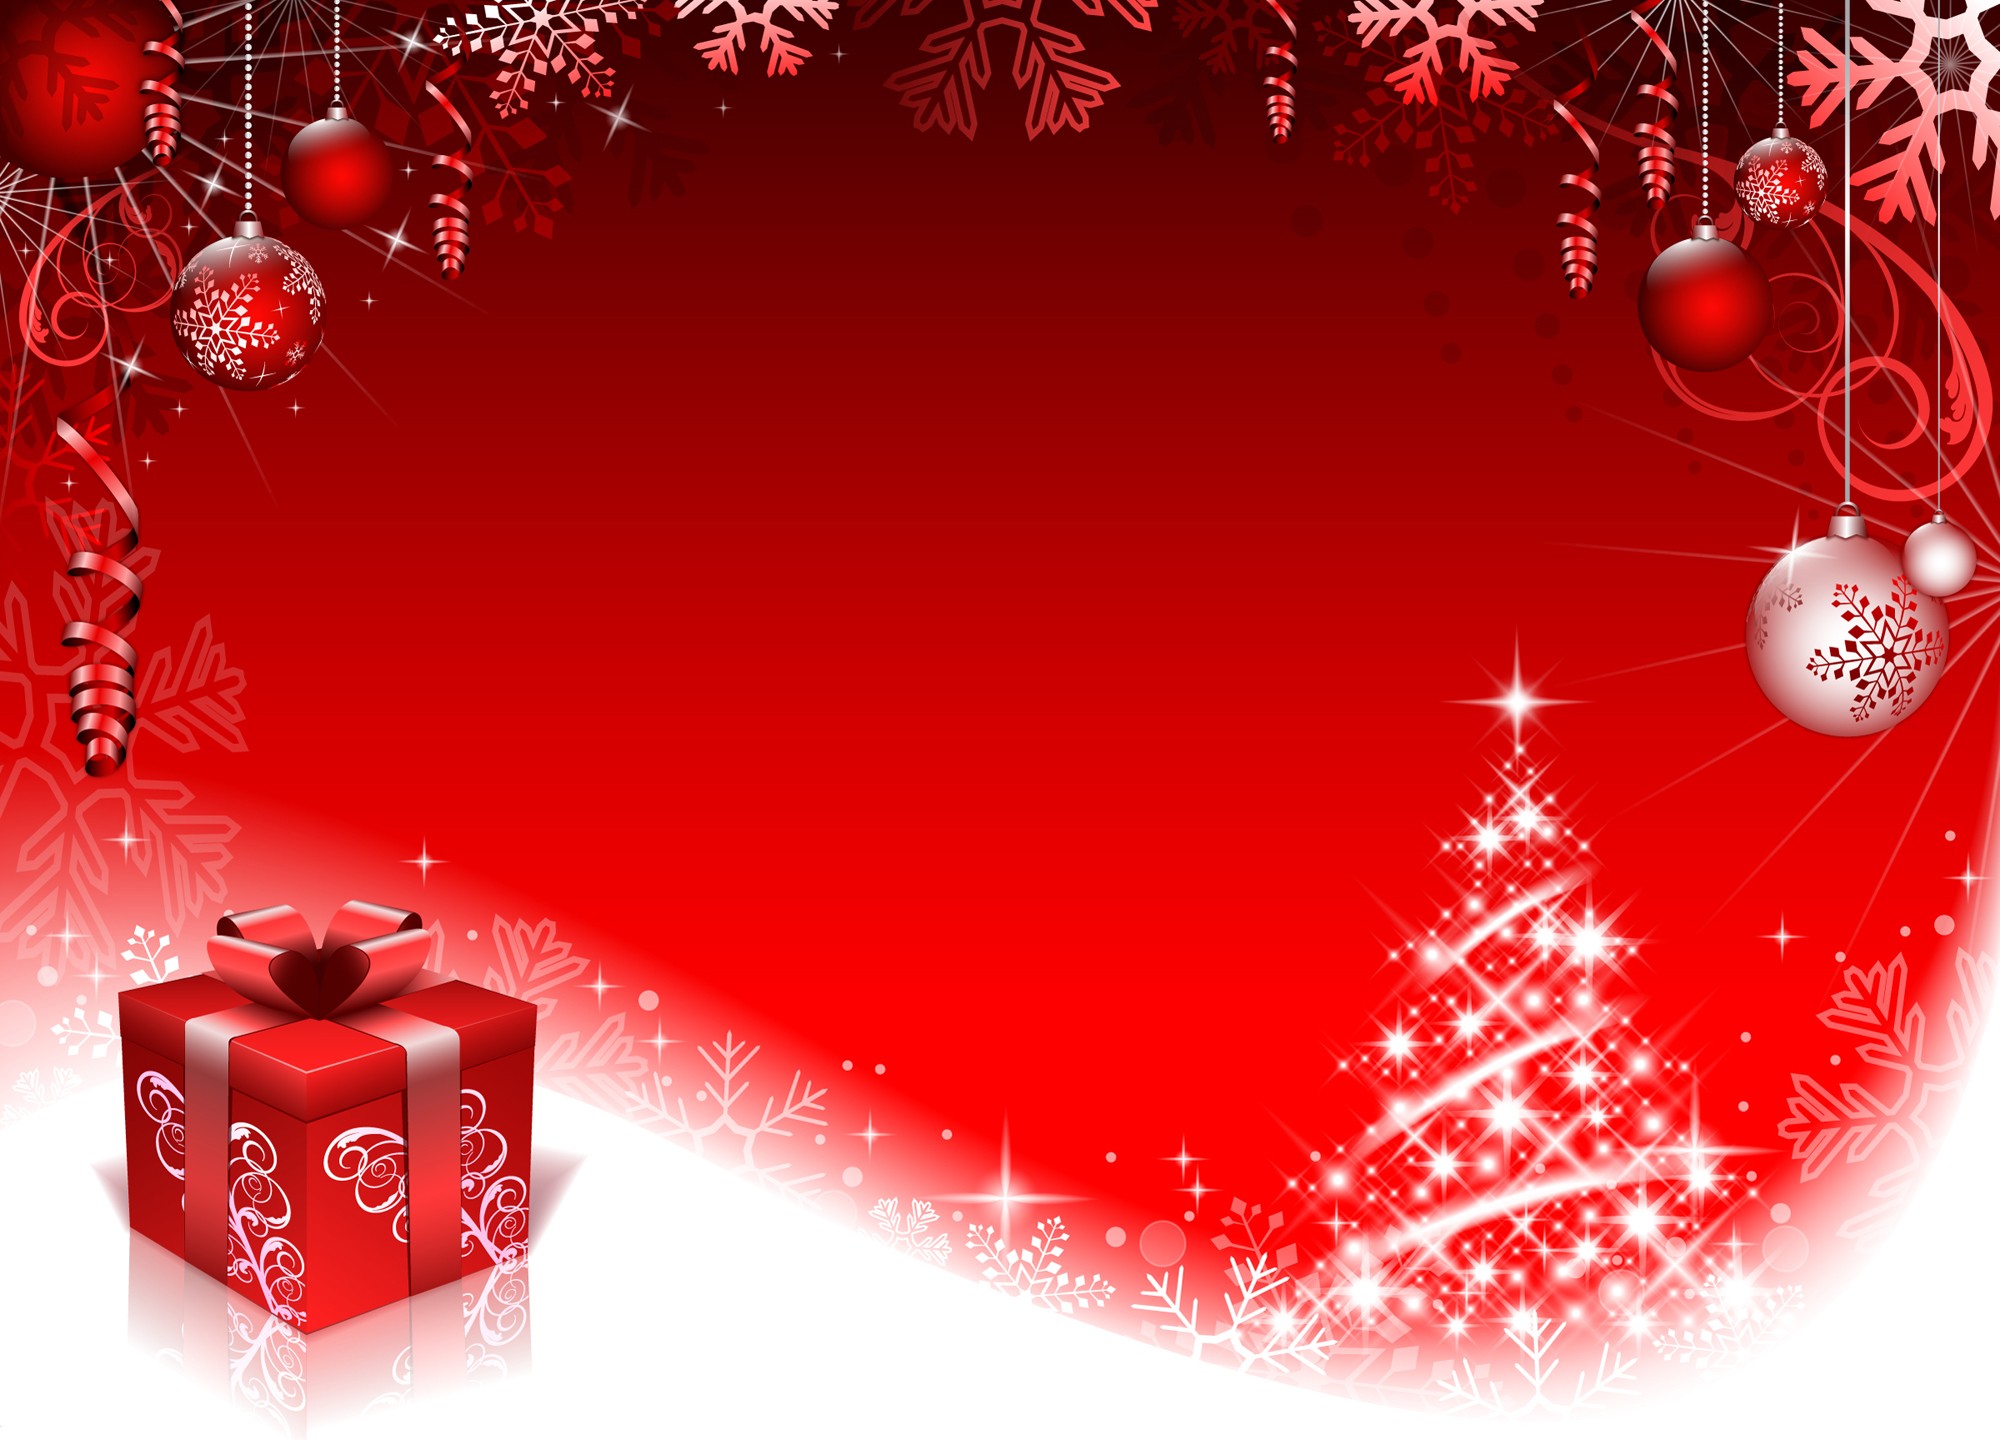 Red Style Christmas Background Art Vector 01 Free Download Photoshop